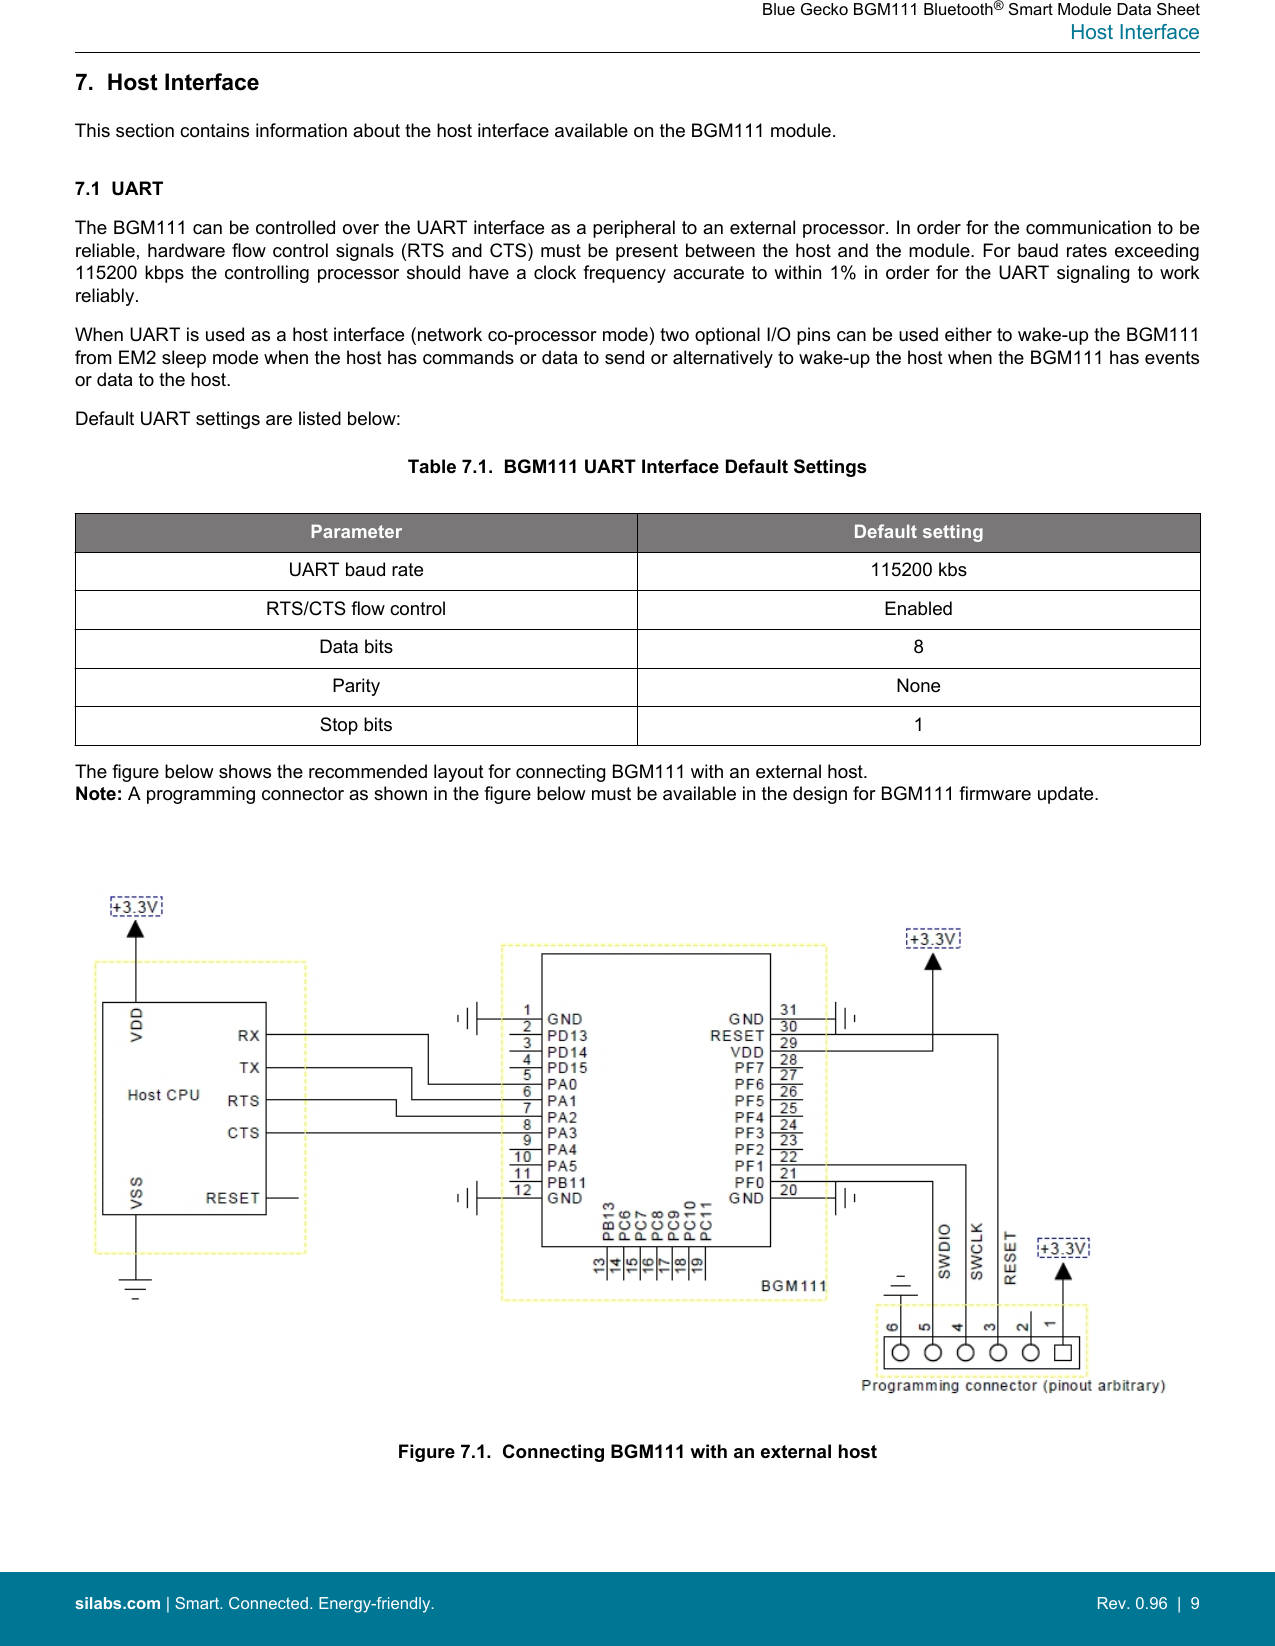 7.  Host InterfaceThis section contains information about the host interface available on the BGM111 module.7.1  UARTThe BGM111 can be controlled over the UART interface as a peripheral to an external processor. In order for the communication to bereliable, hardware flow control signals (RTS and CTS) must be present between the host and the module. For baud rates exceeding115200 kbps the controlling processor should have a clock frequency accurate  to  within  1%  in order  for  the UART  signaling to  workreliably.When UART is used as a host interface (network co-processor mode) two optional I/O pins can be used either to wake-up the BGM111from EM2 sleep mode when the host has commands or data to send or alternatively to wake-up the host when the BGM111 has eventsor data to the host.Default UART settings are listed below:Table 7.1.  BGM111 UART Interface Default SettingsParameter Default settingUART baud rate 115200 kbsRTS/CTS flow control EnabledData bits 8Parity NoneStop bits 1The figure below shows the recommended layout for connecting BGM111 with an external host.Note: A programming connector as shown in the figure below must be available in the design for BGM111 firmware update. Figure 7.1.  Connecting BGM111 with an external hostBlue Gecko BGM111 Bluetooth® Smart Module Data SheetHost Interfacesilabs.com | Smart. Connected. Energy-friendly. Rev. 0.96  |  9